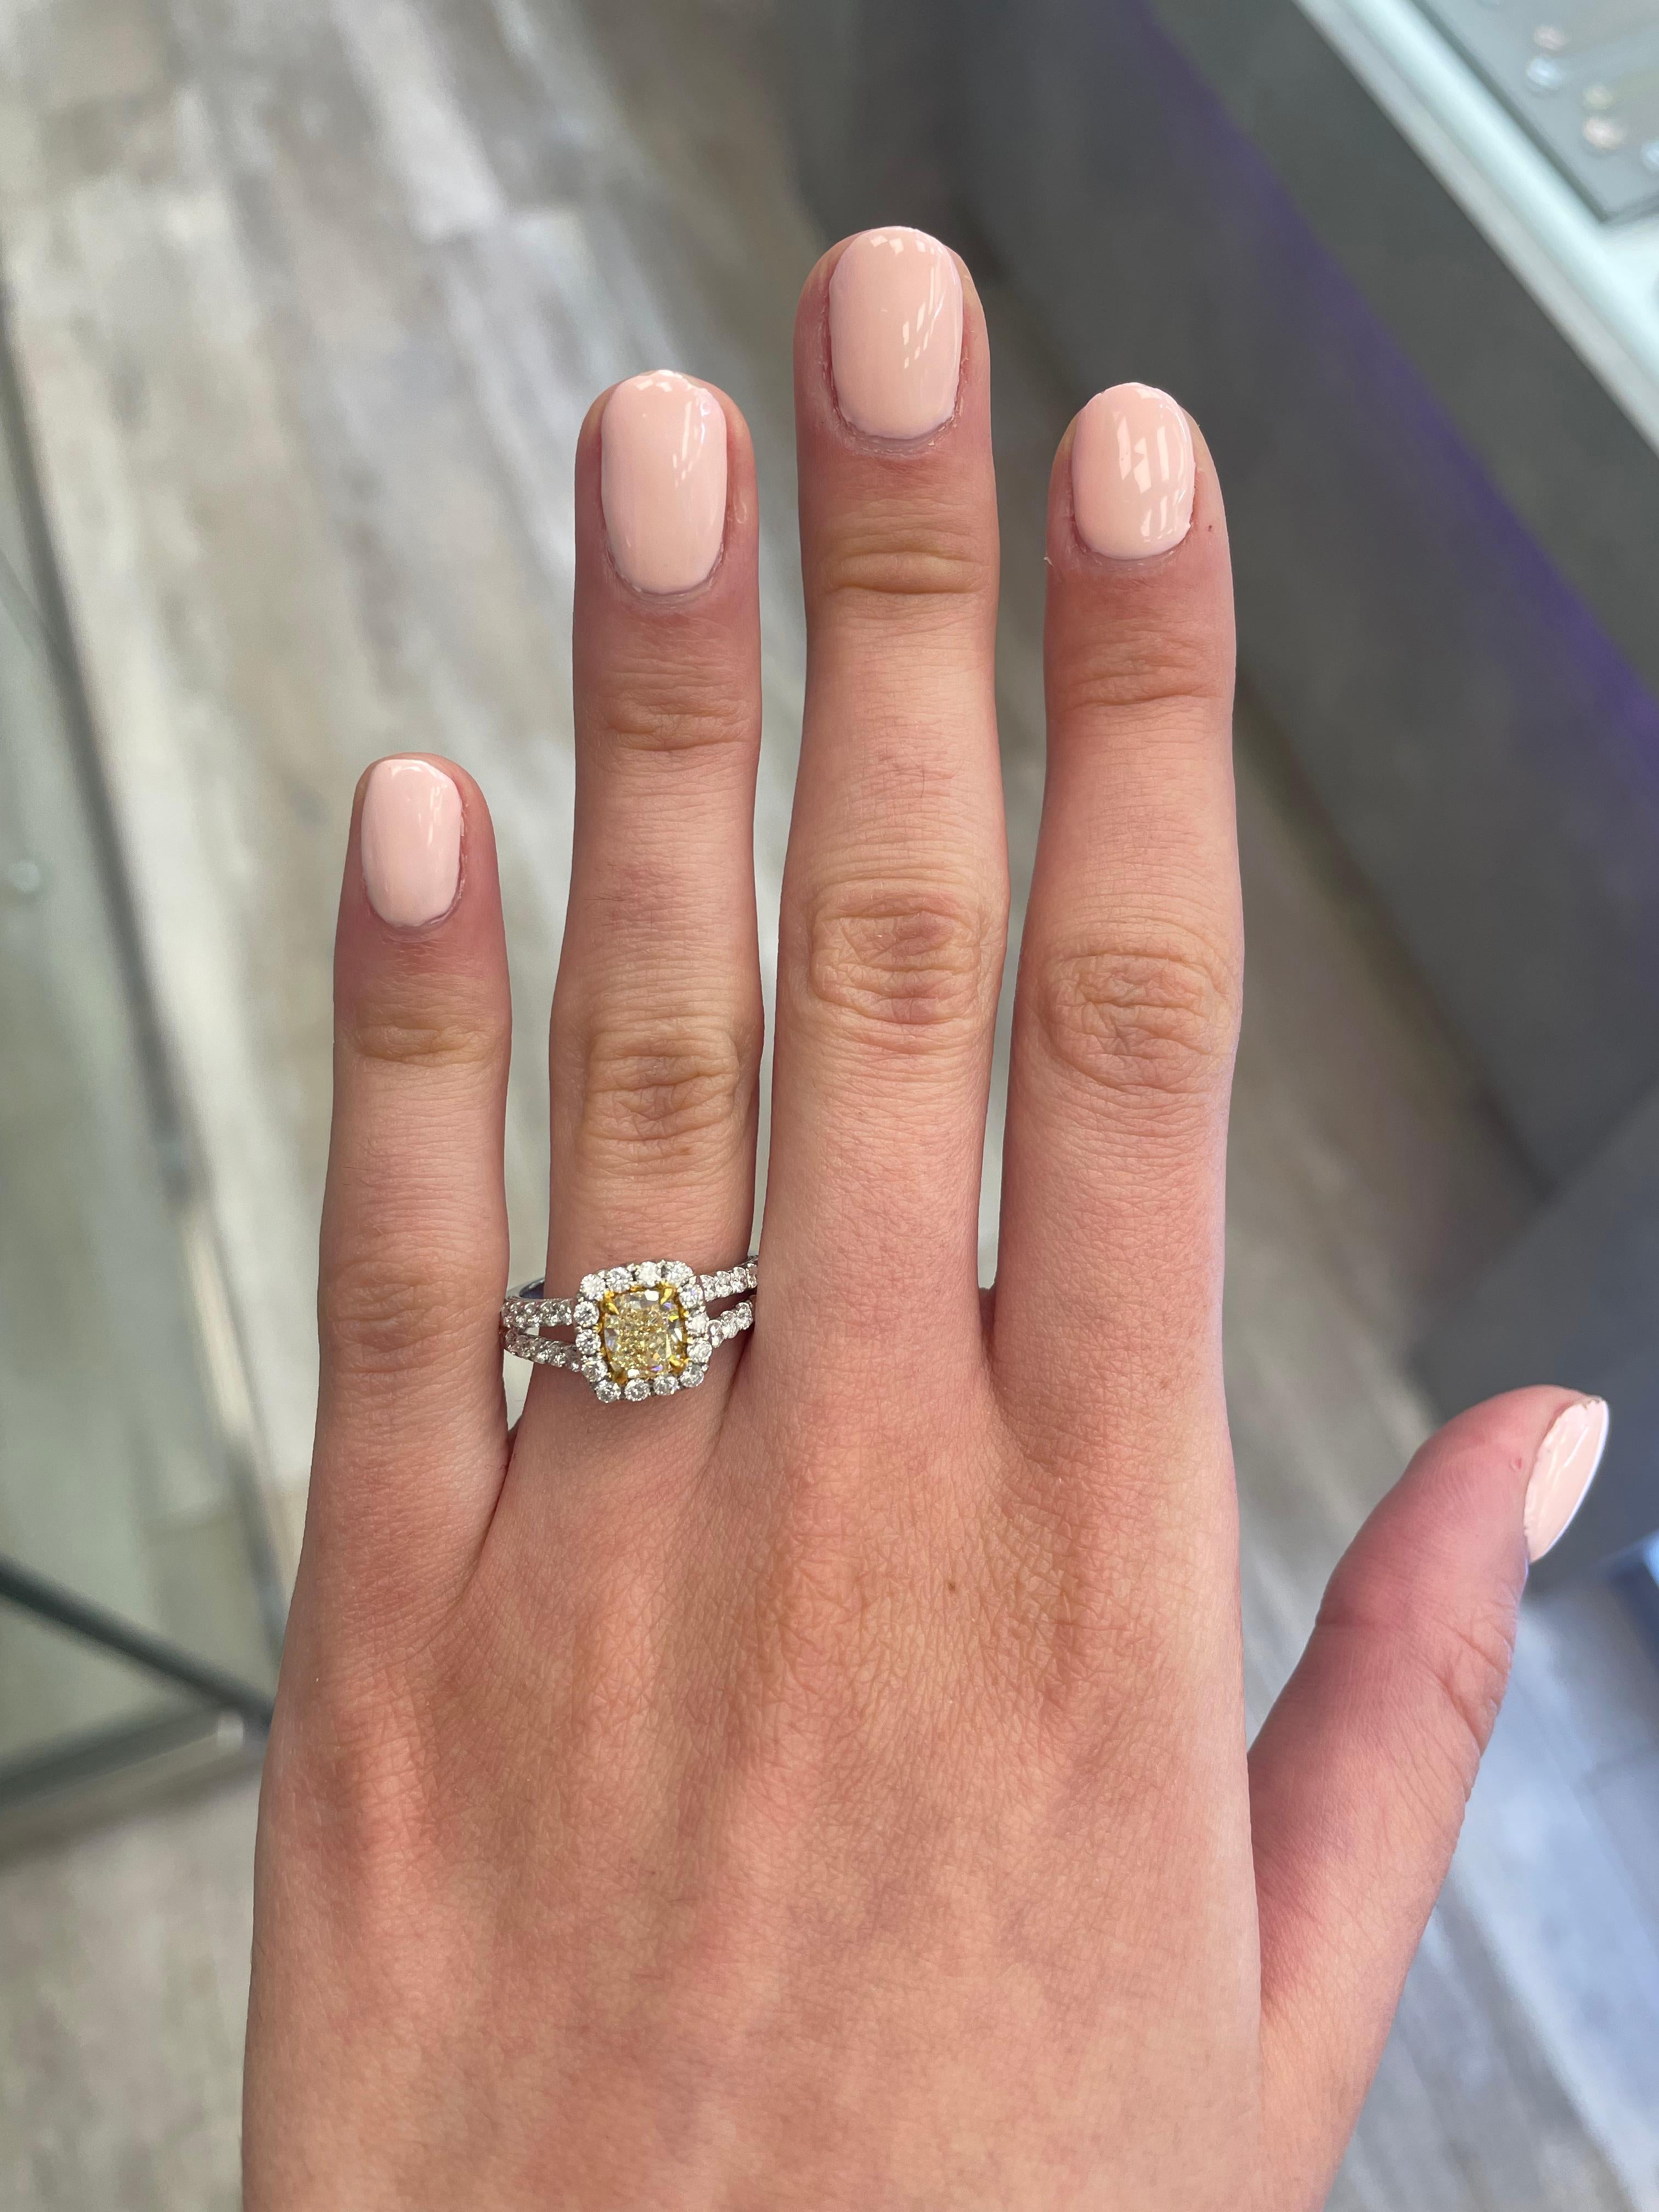 Stunning modern EGL certified yellow diamond with halo ring, two-tone 18k yellow and white gold, split shank. By Alexander Beverly Hills
1.79 carats total diamond weight.
1.01 carat cushion cut Fancy Yellow color and VS1 clarity diamond, EGL graded.